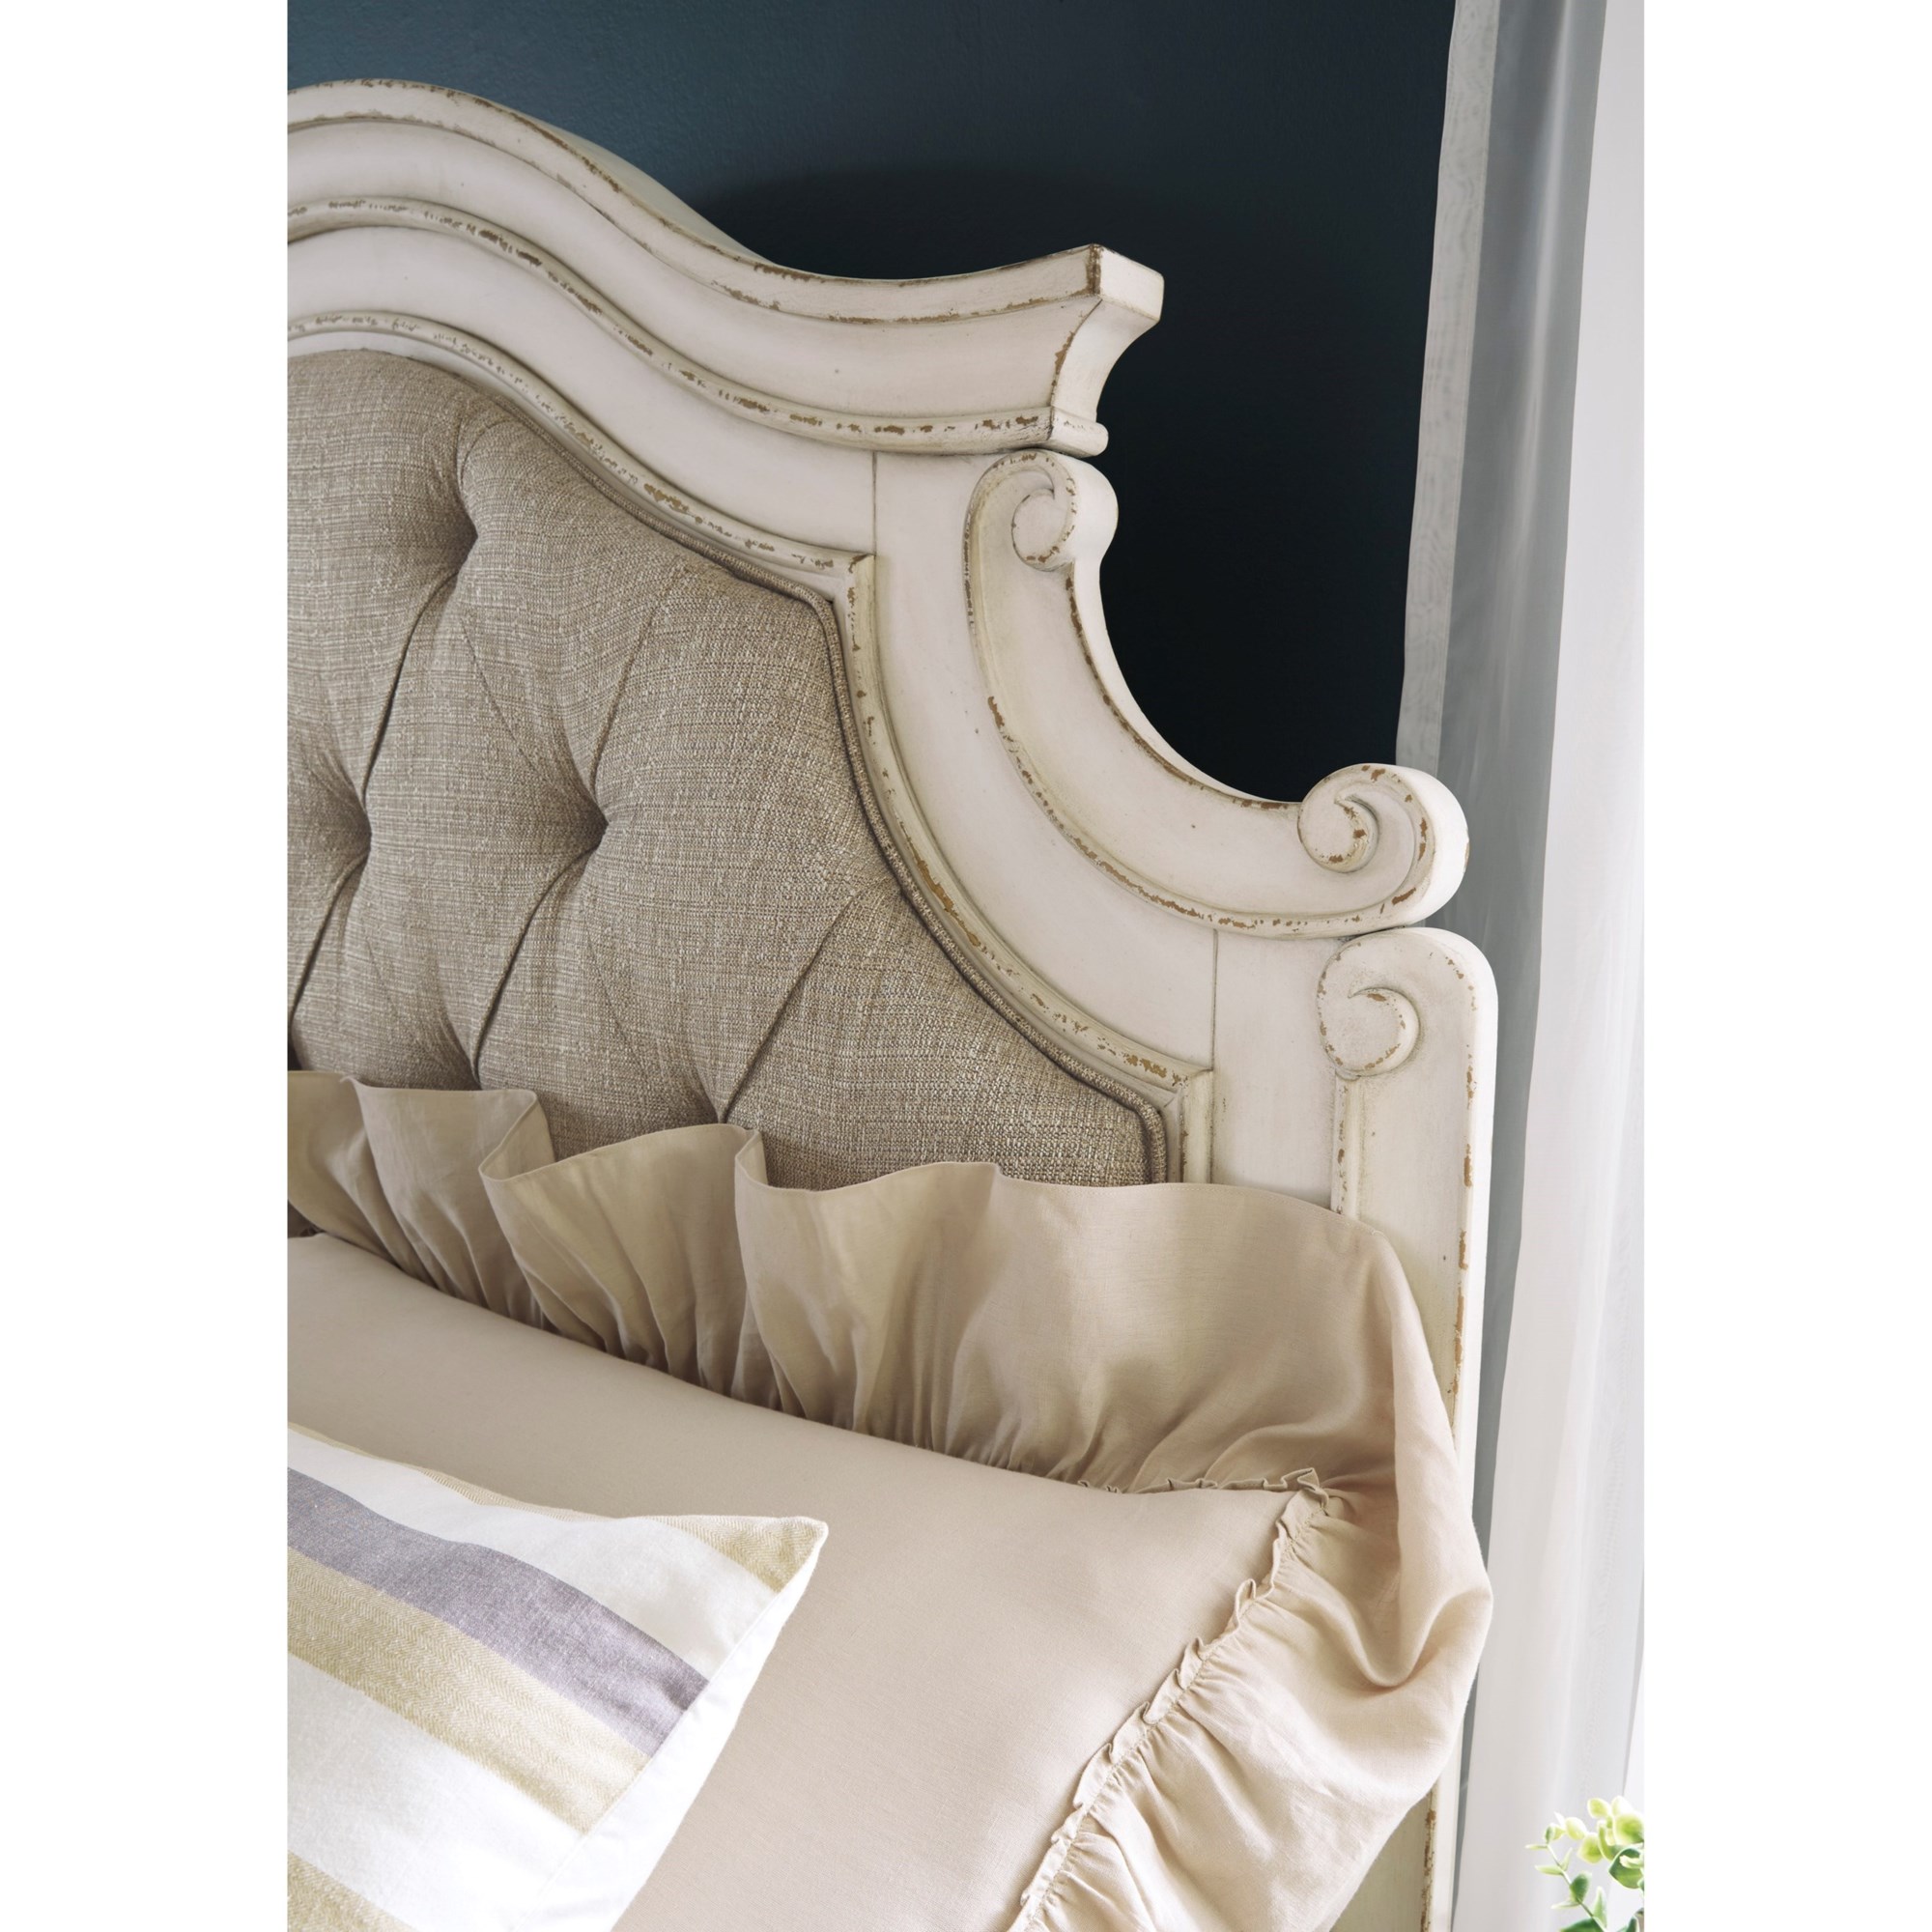 Realyn Queen Upholstered Panel Bed